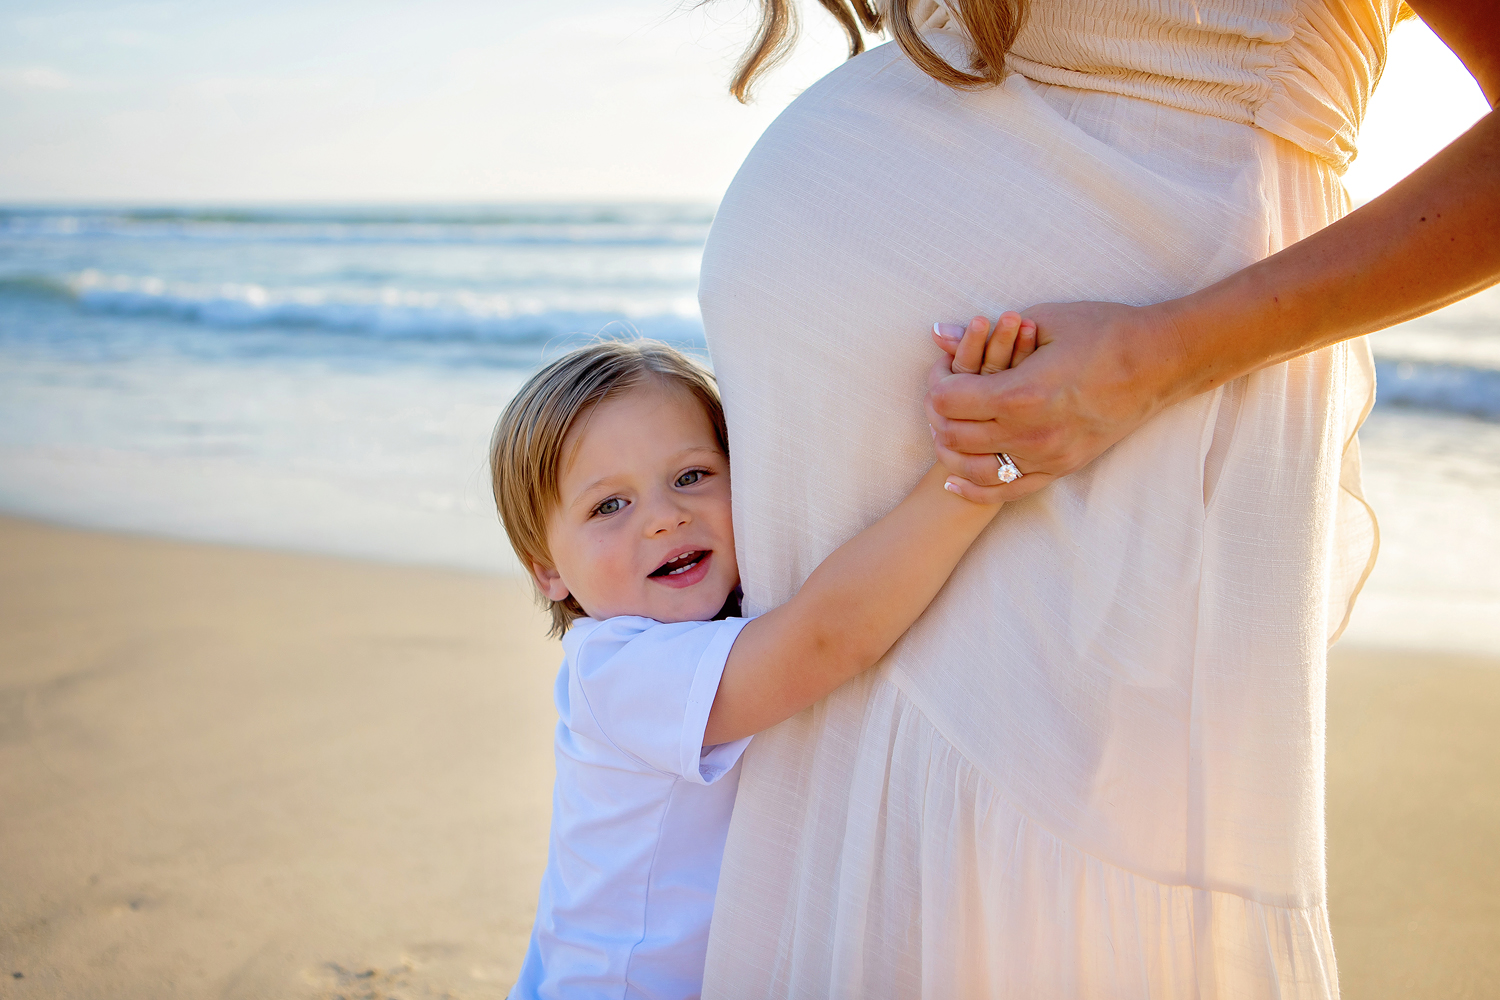 Maternity Photographers in San Diego